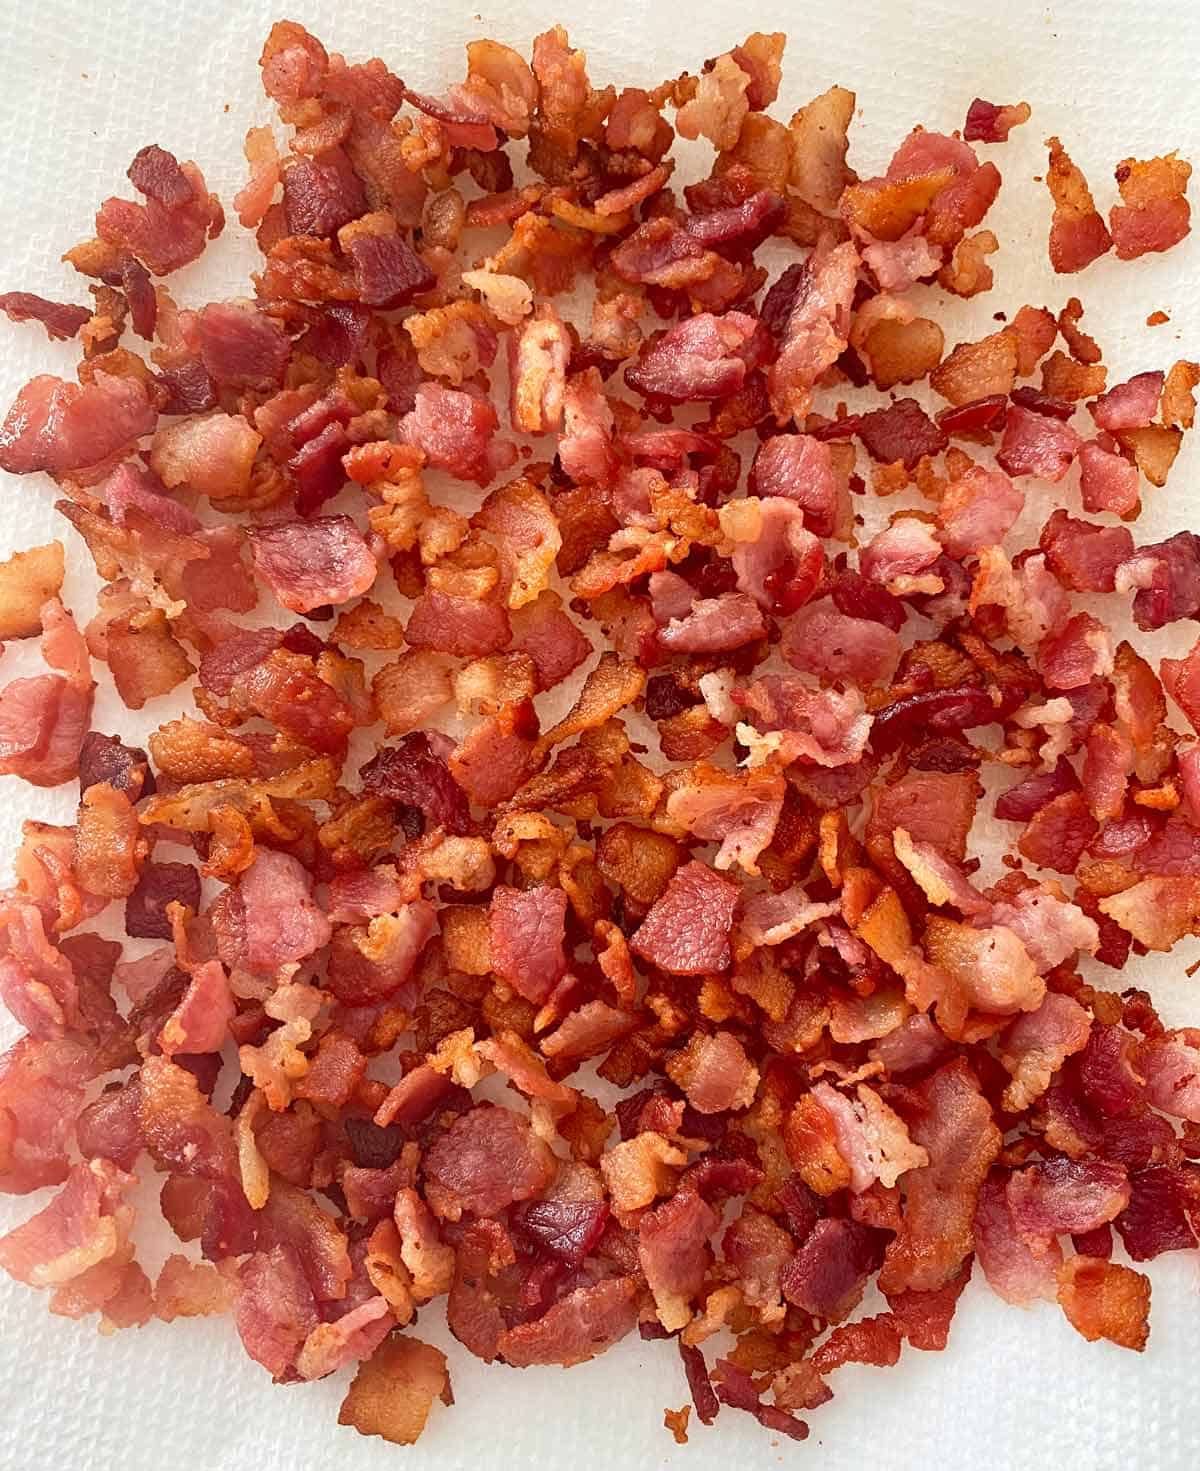 Cooked chopped bacon bits draining on paper towels.